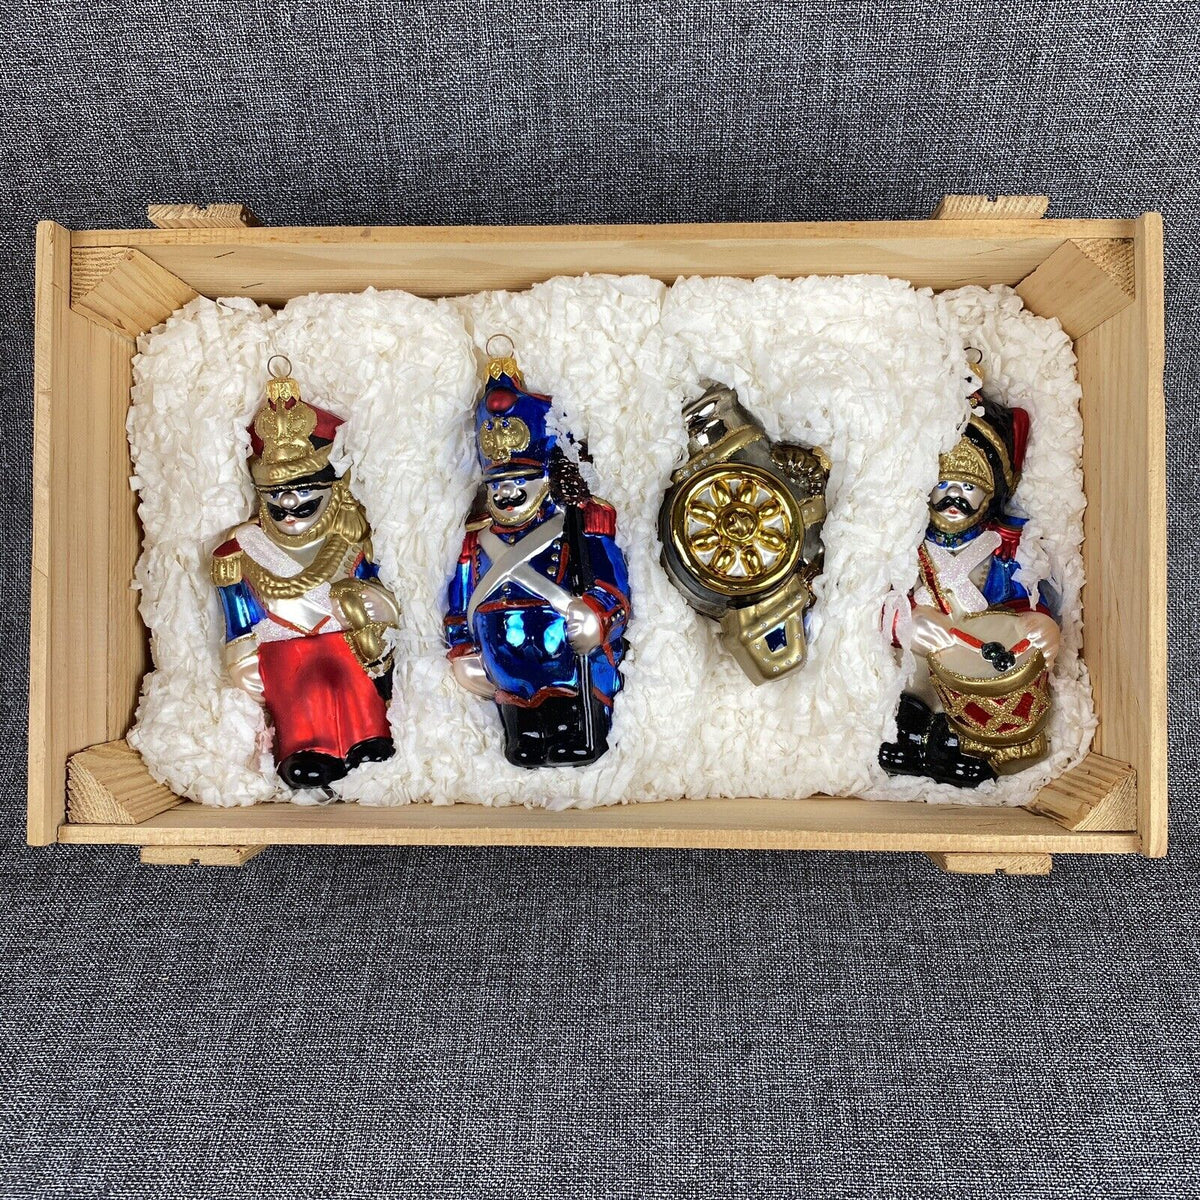 Kurt Adler Napoleonic Soldiers Christmas Glass Ornament in wooden Box VIDEO